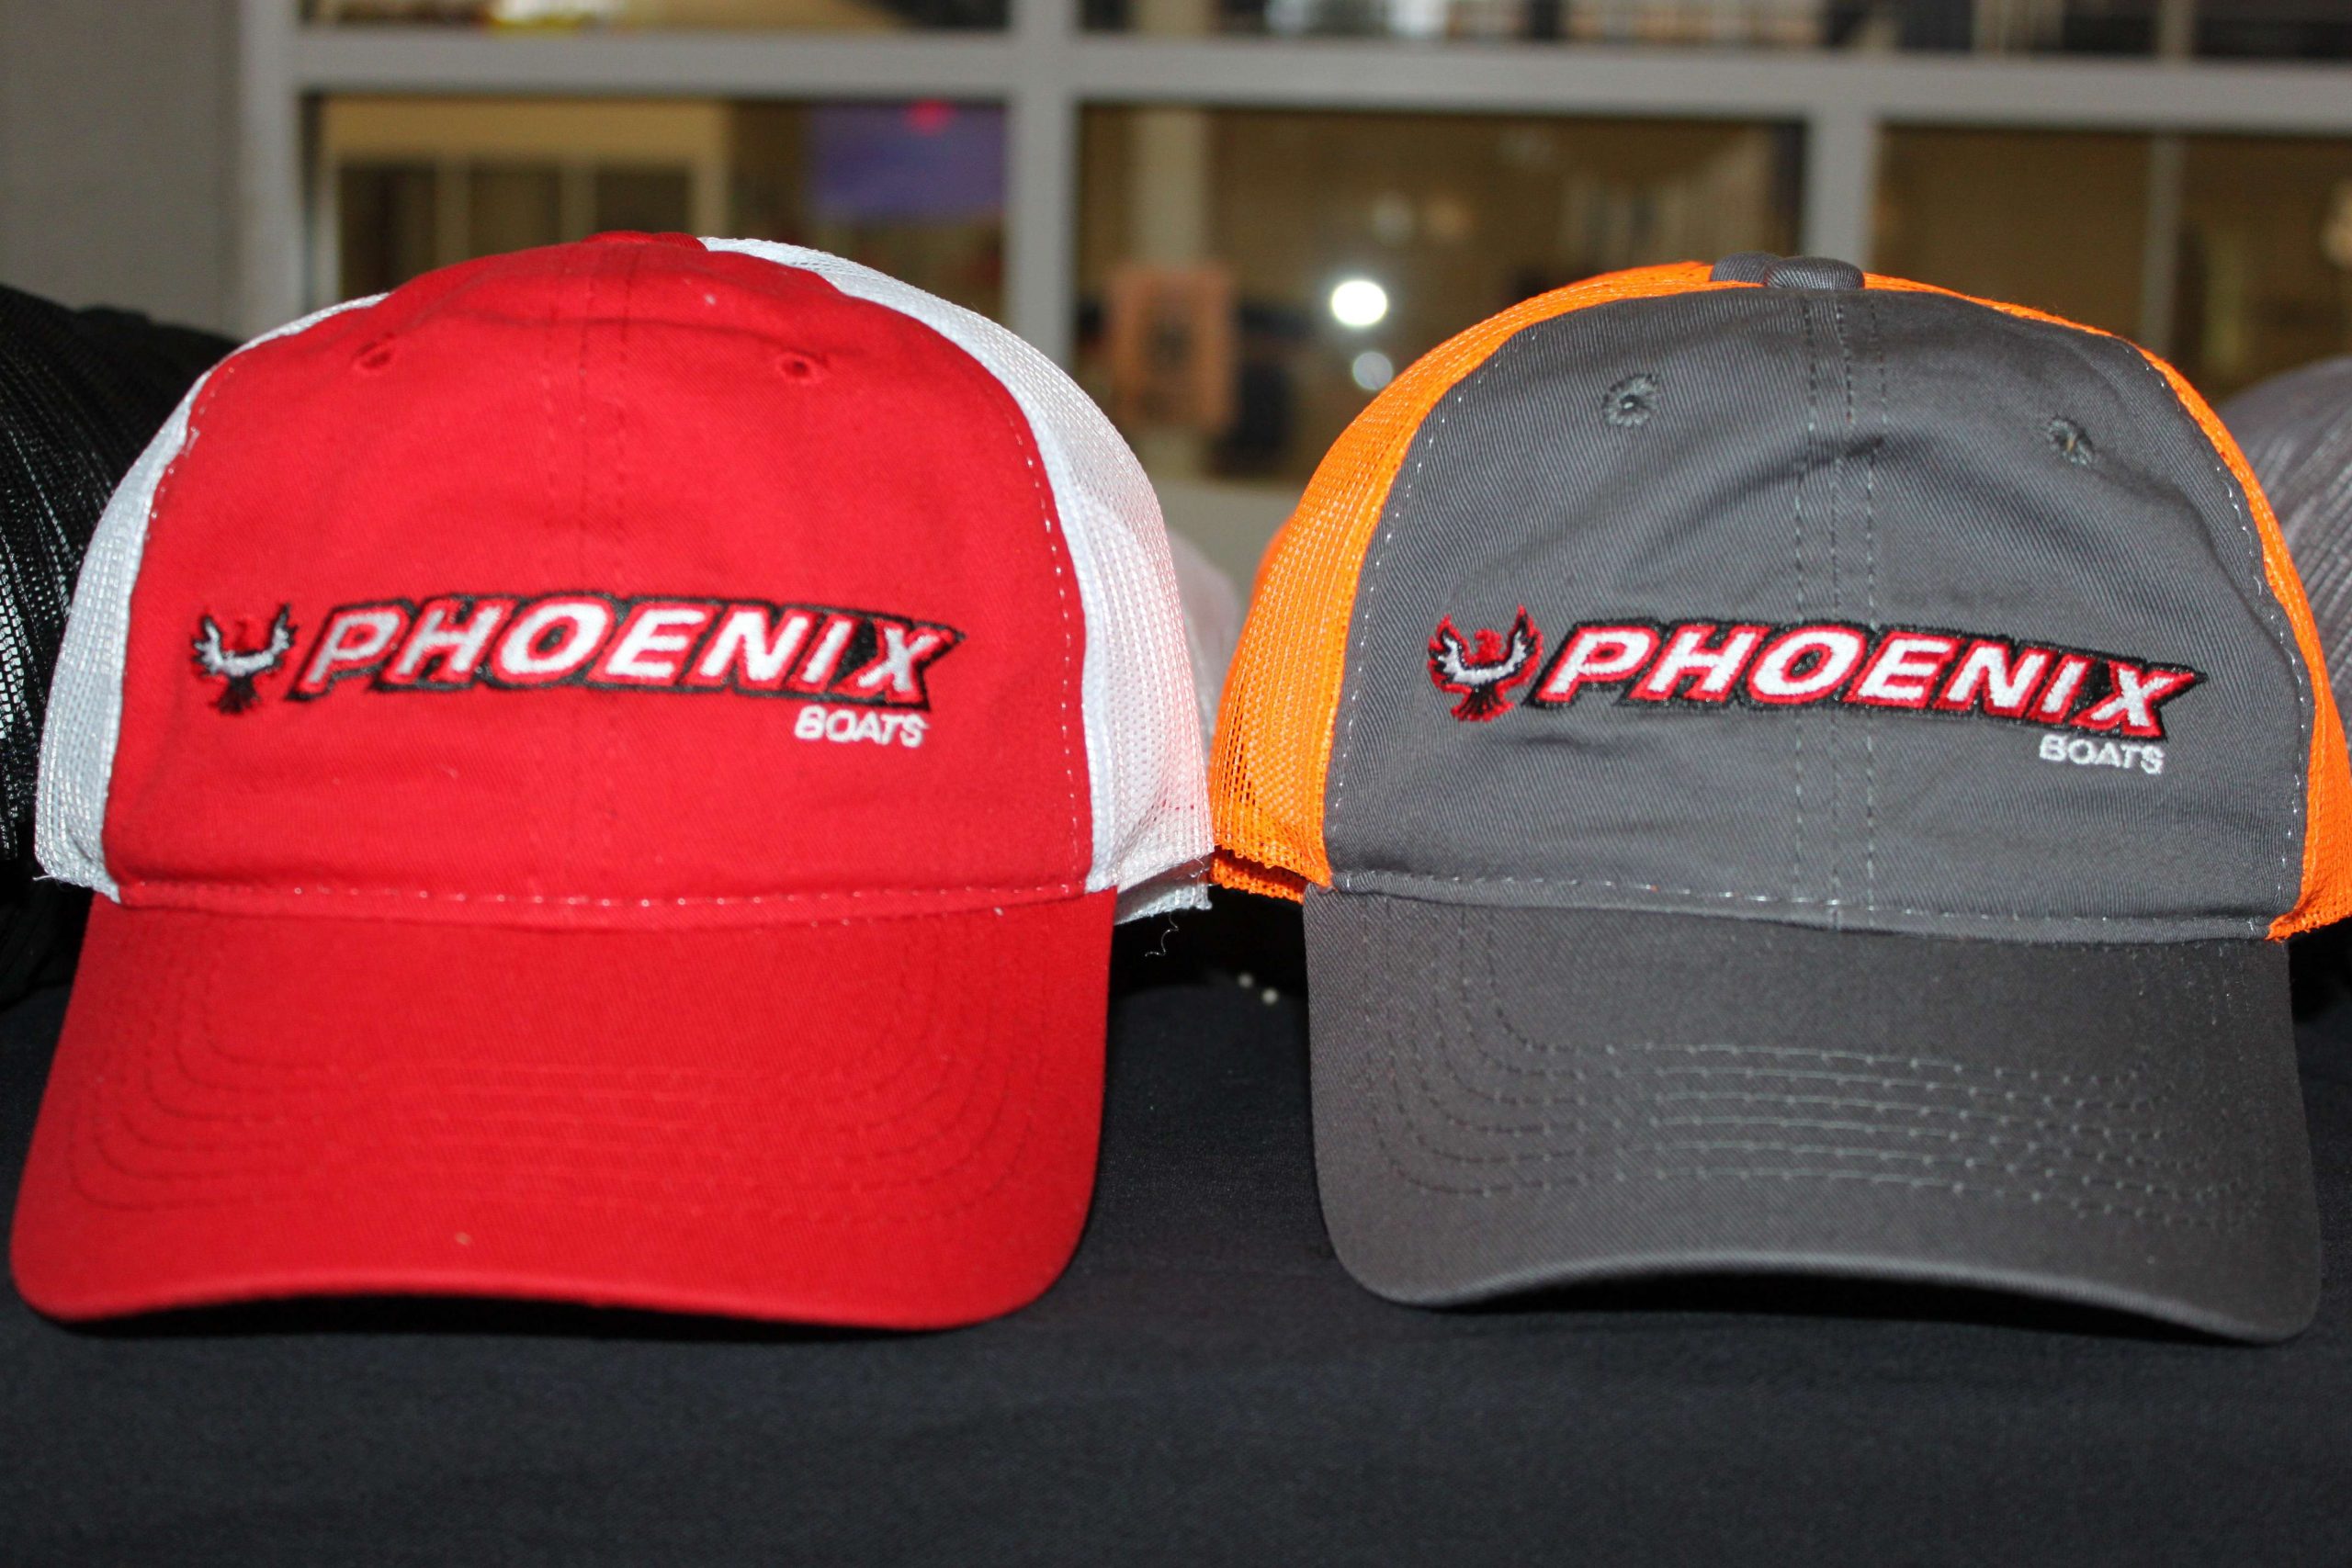 Phoenix Boats had stacks of brightly colored hats.